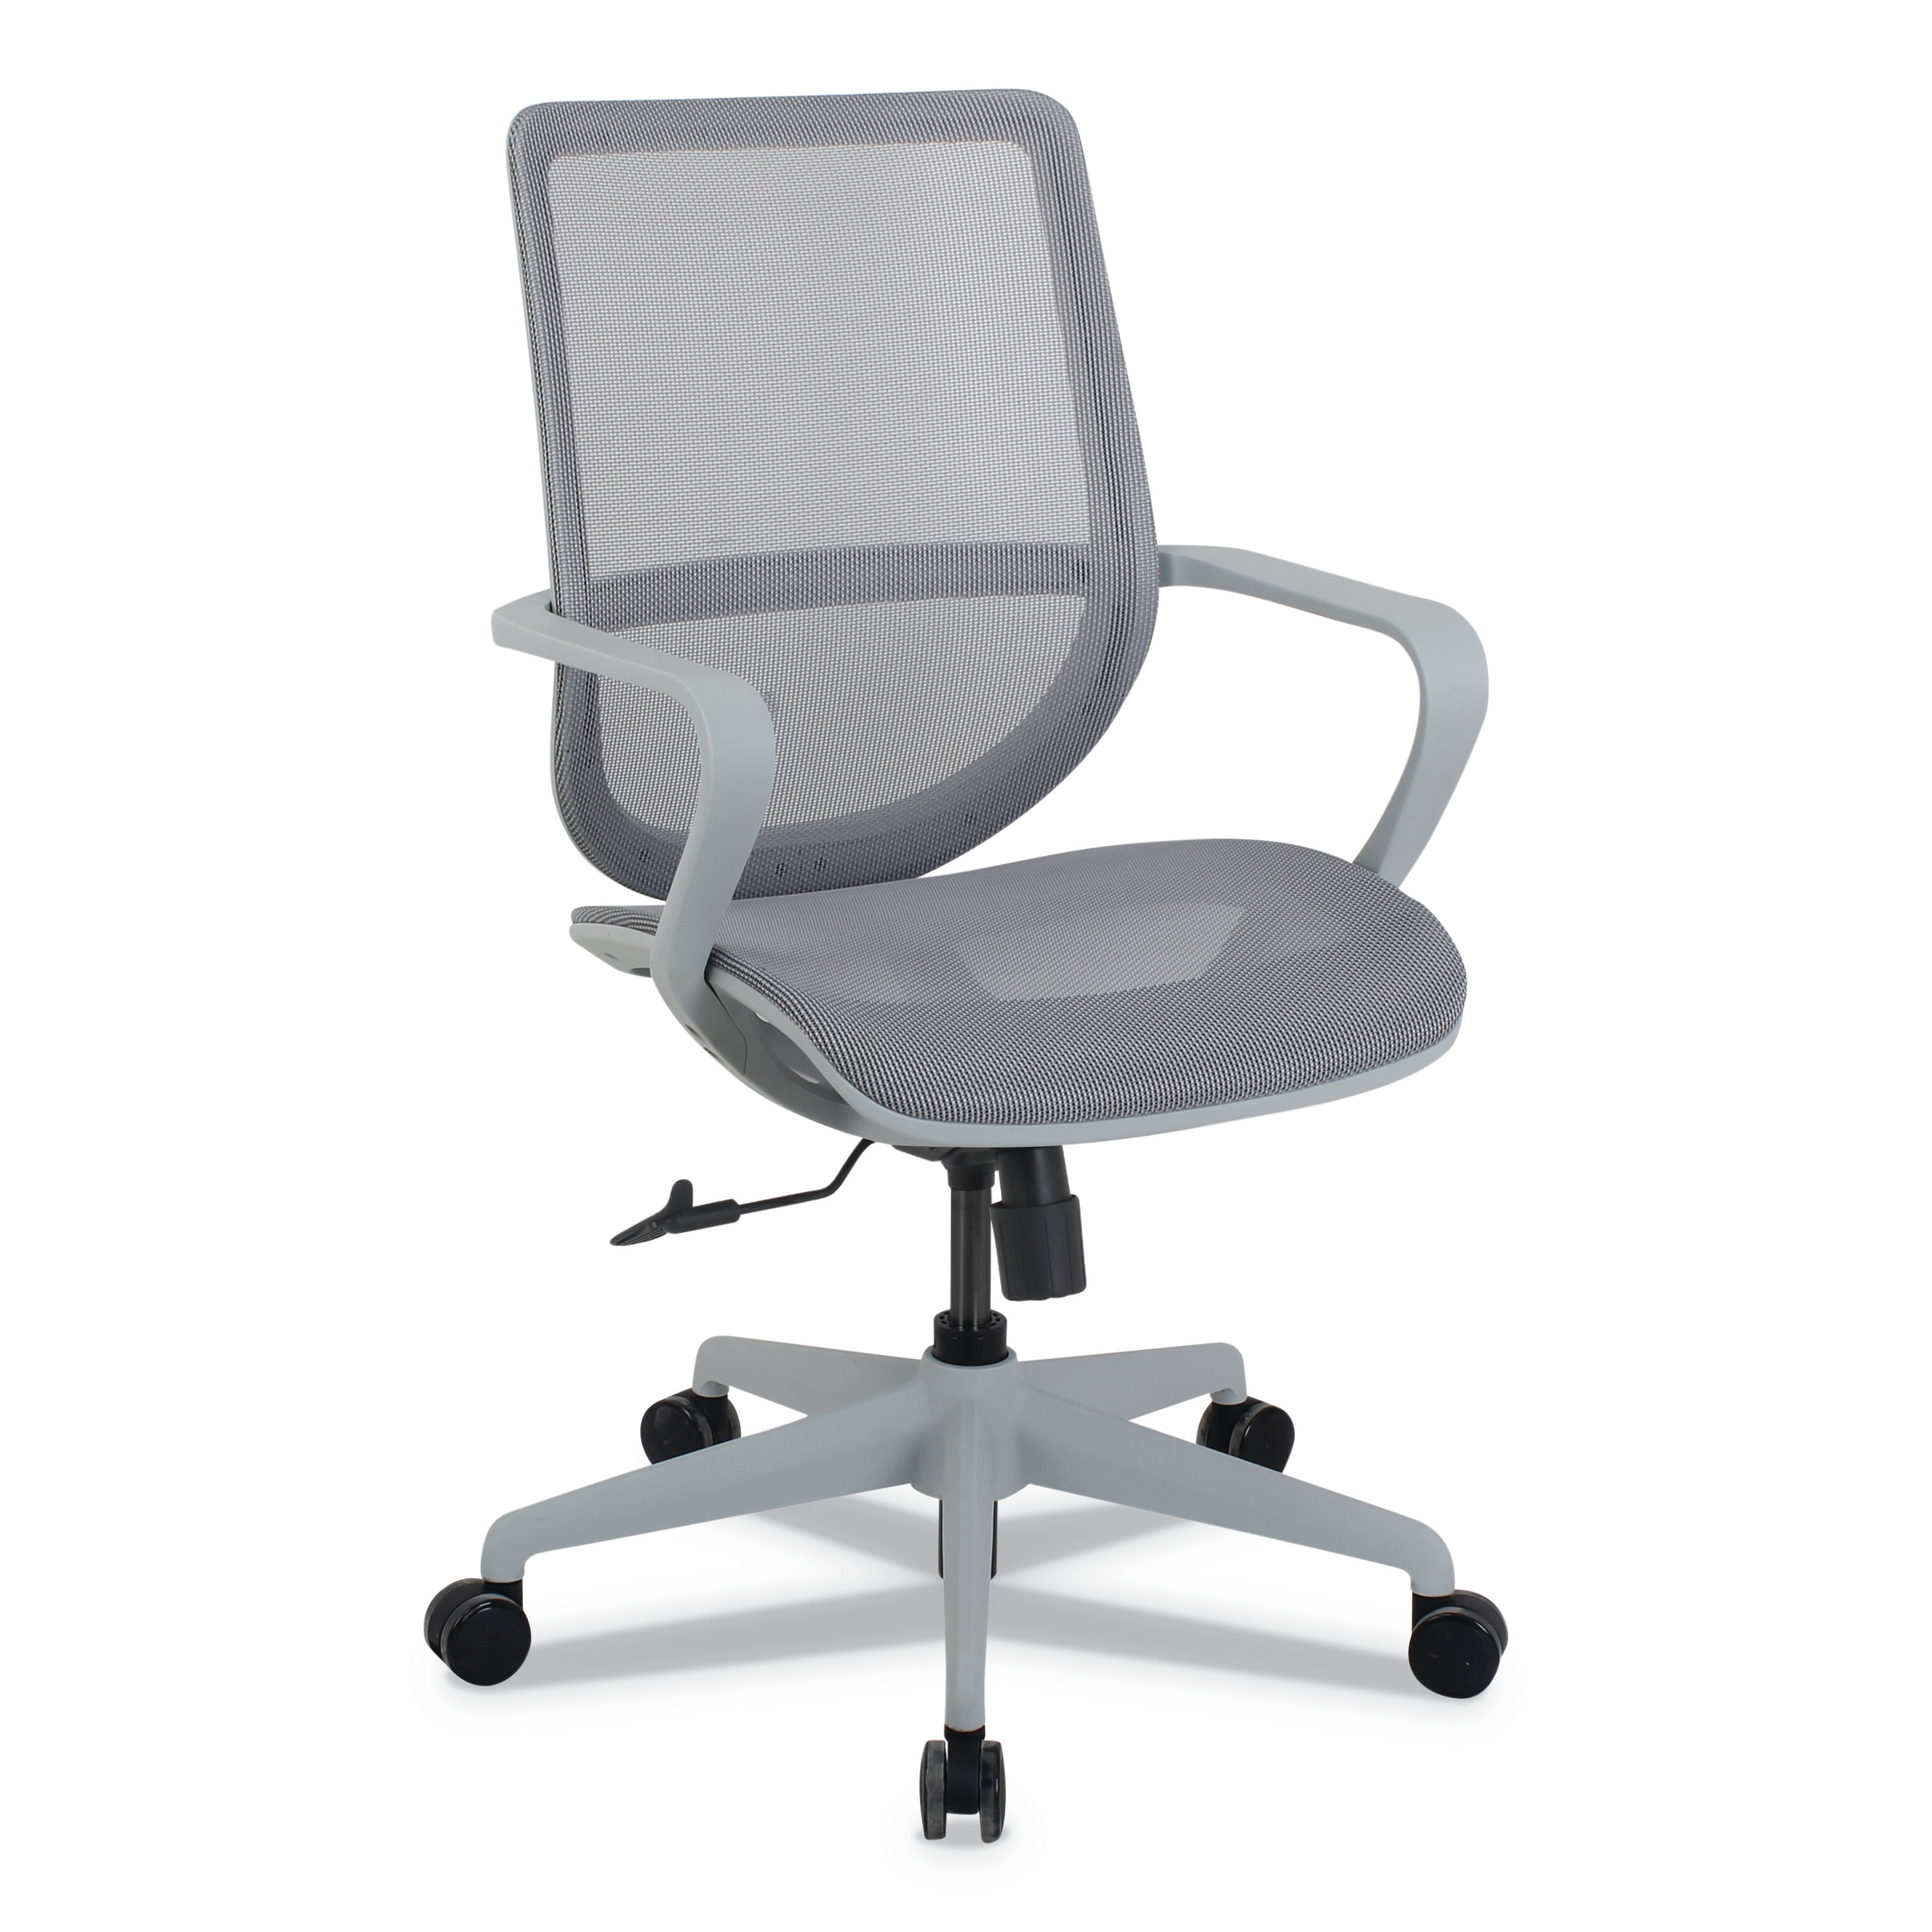 Alera KA Series Mid-Back All-Mesh Office Chair, Up to 275 lbs., Silver